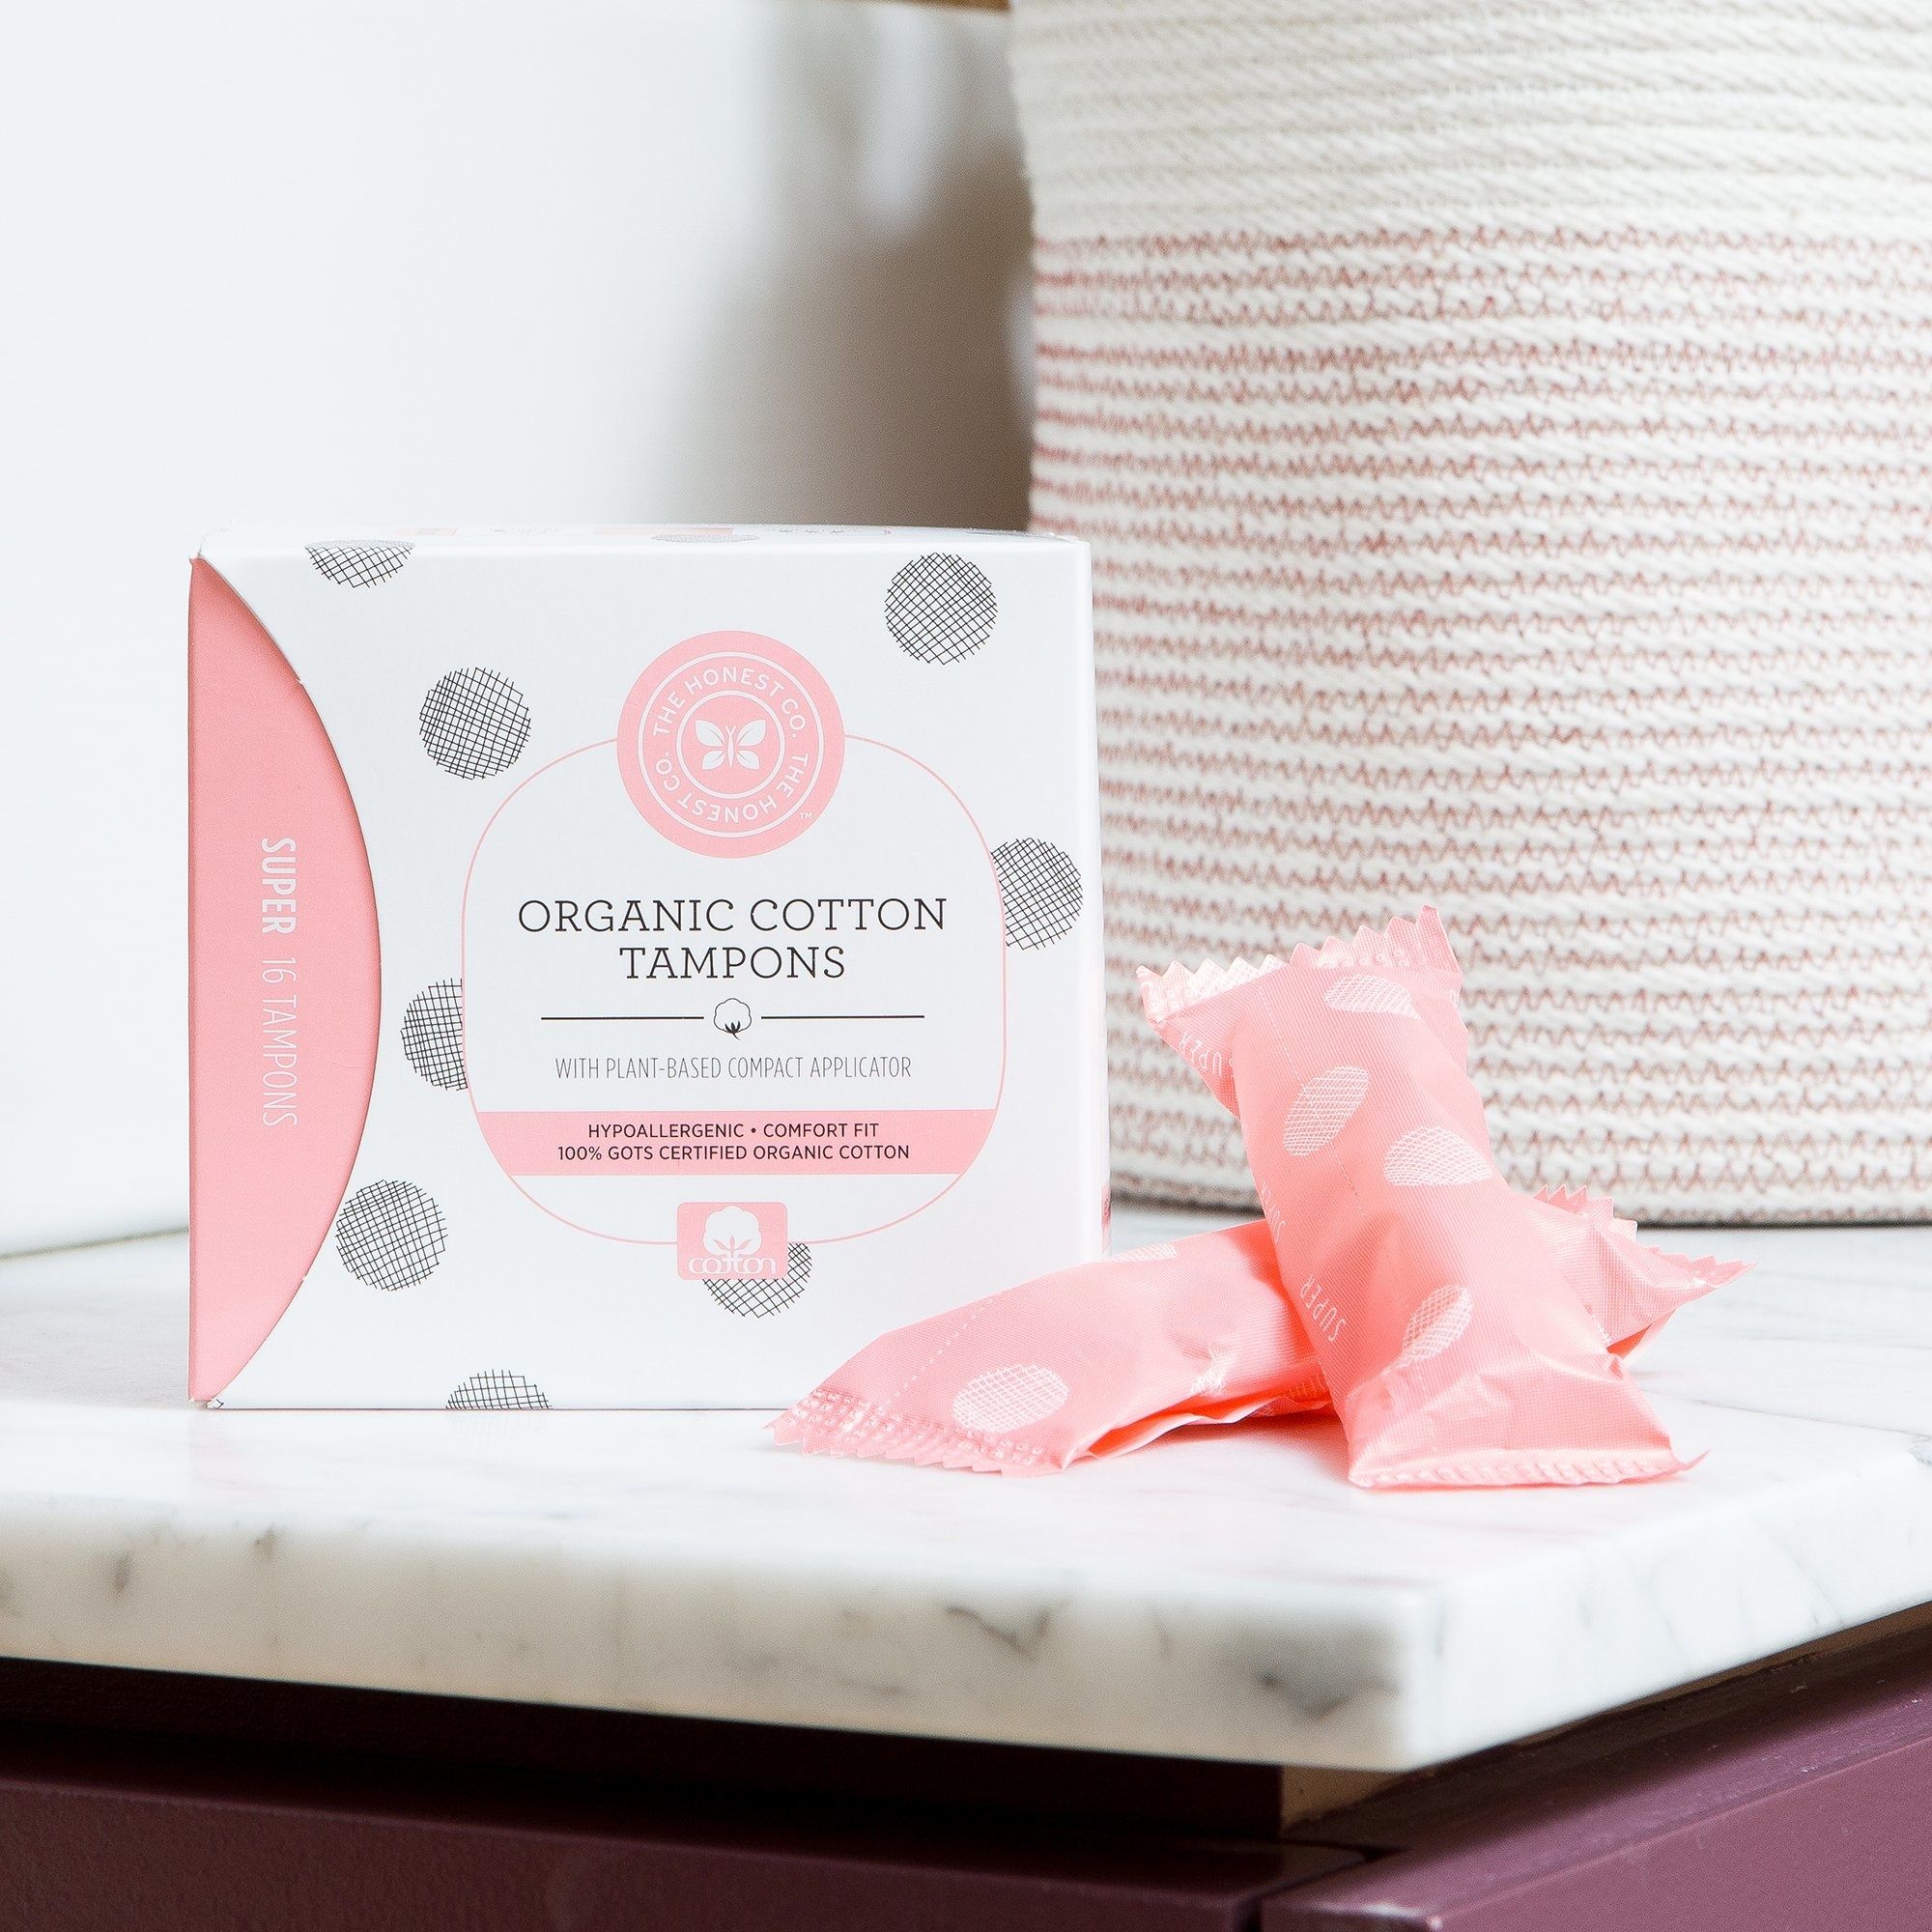 10 Organic Tampon Brands You Might Want To Try On Your Next Cycle